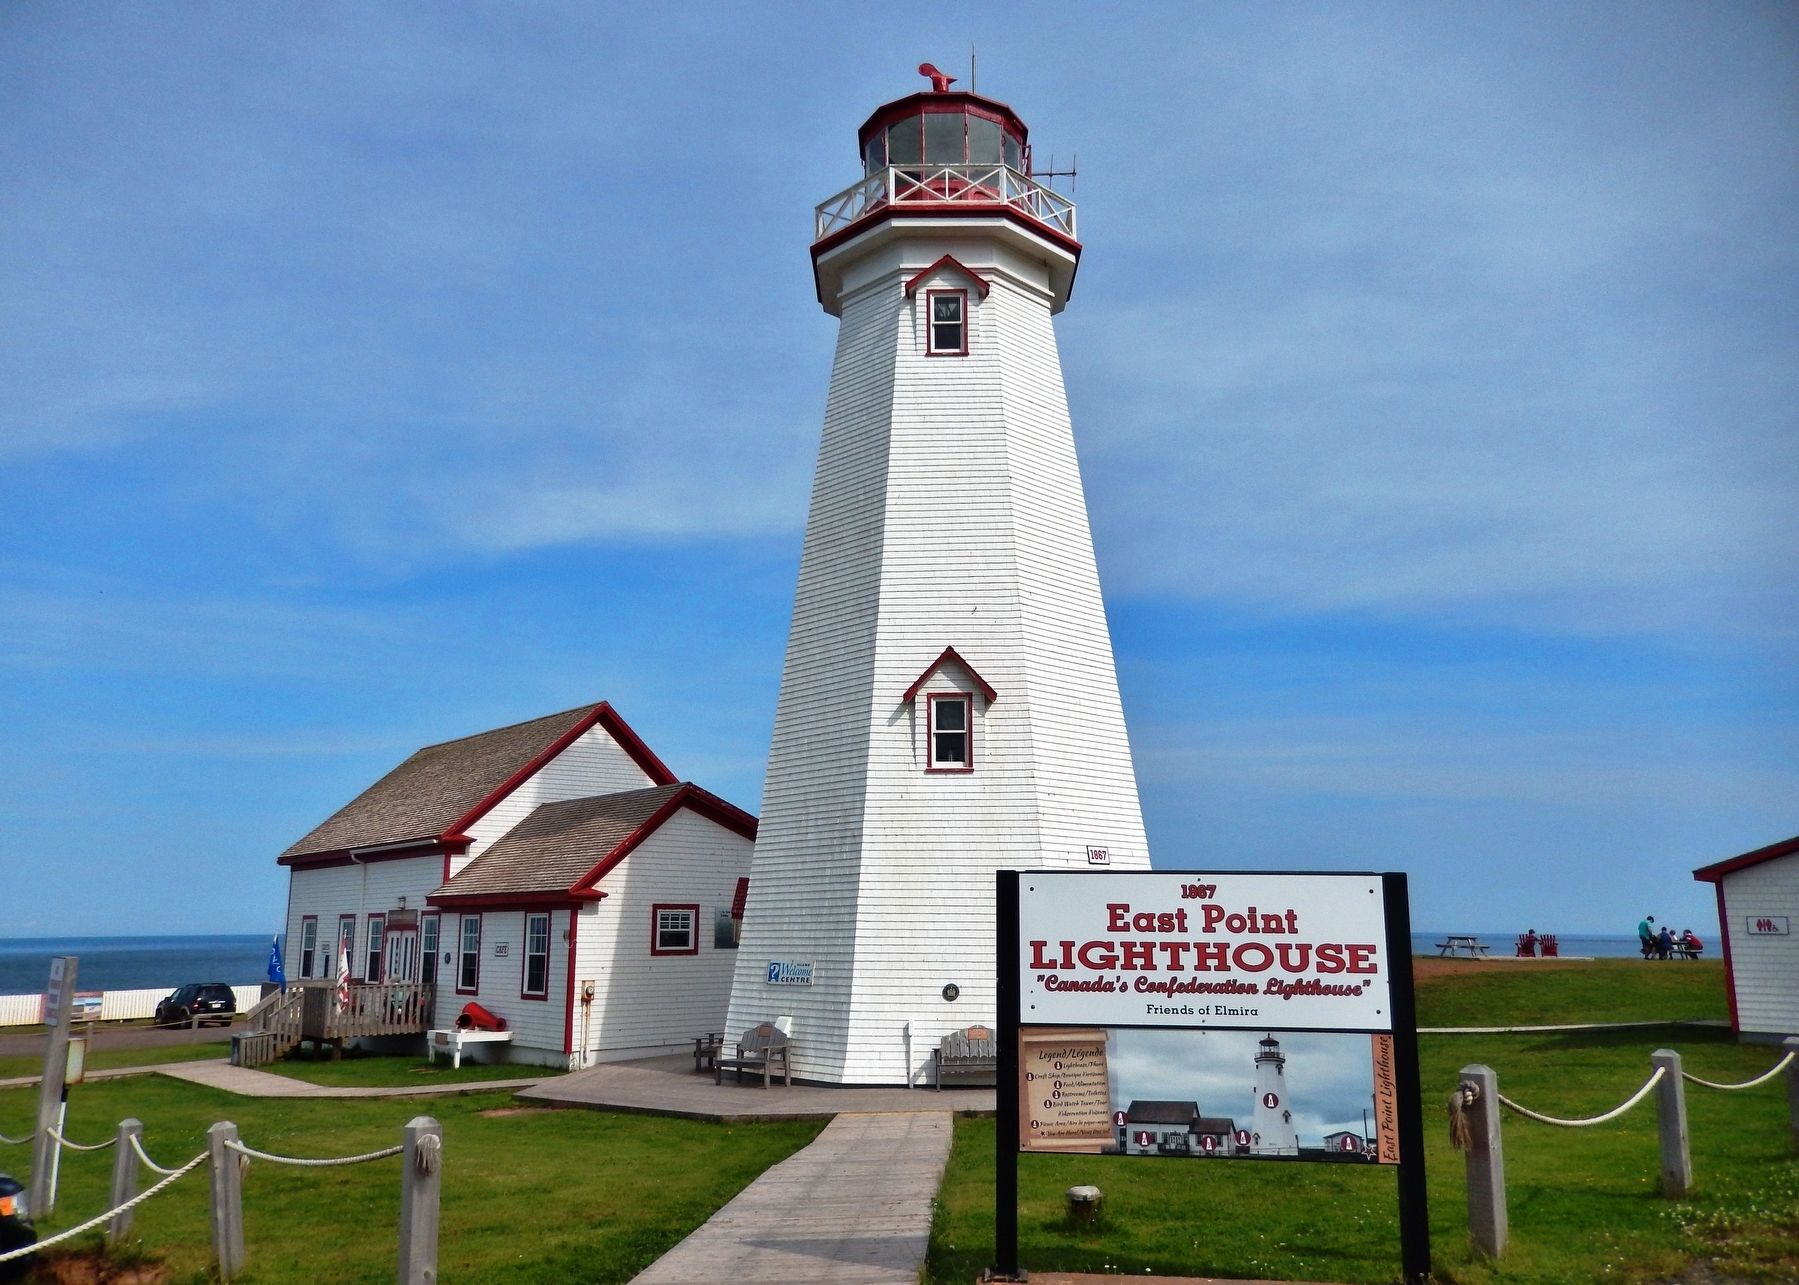 East Point Lighthouse / Phare de la pointe est<br>(<i>located about 9 km east of this marker</i>) image. Click for full size.